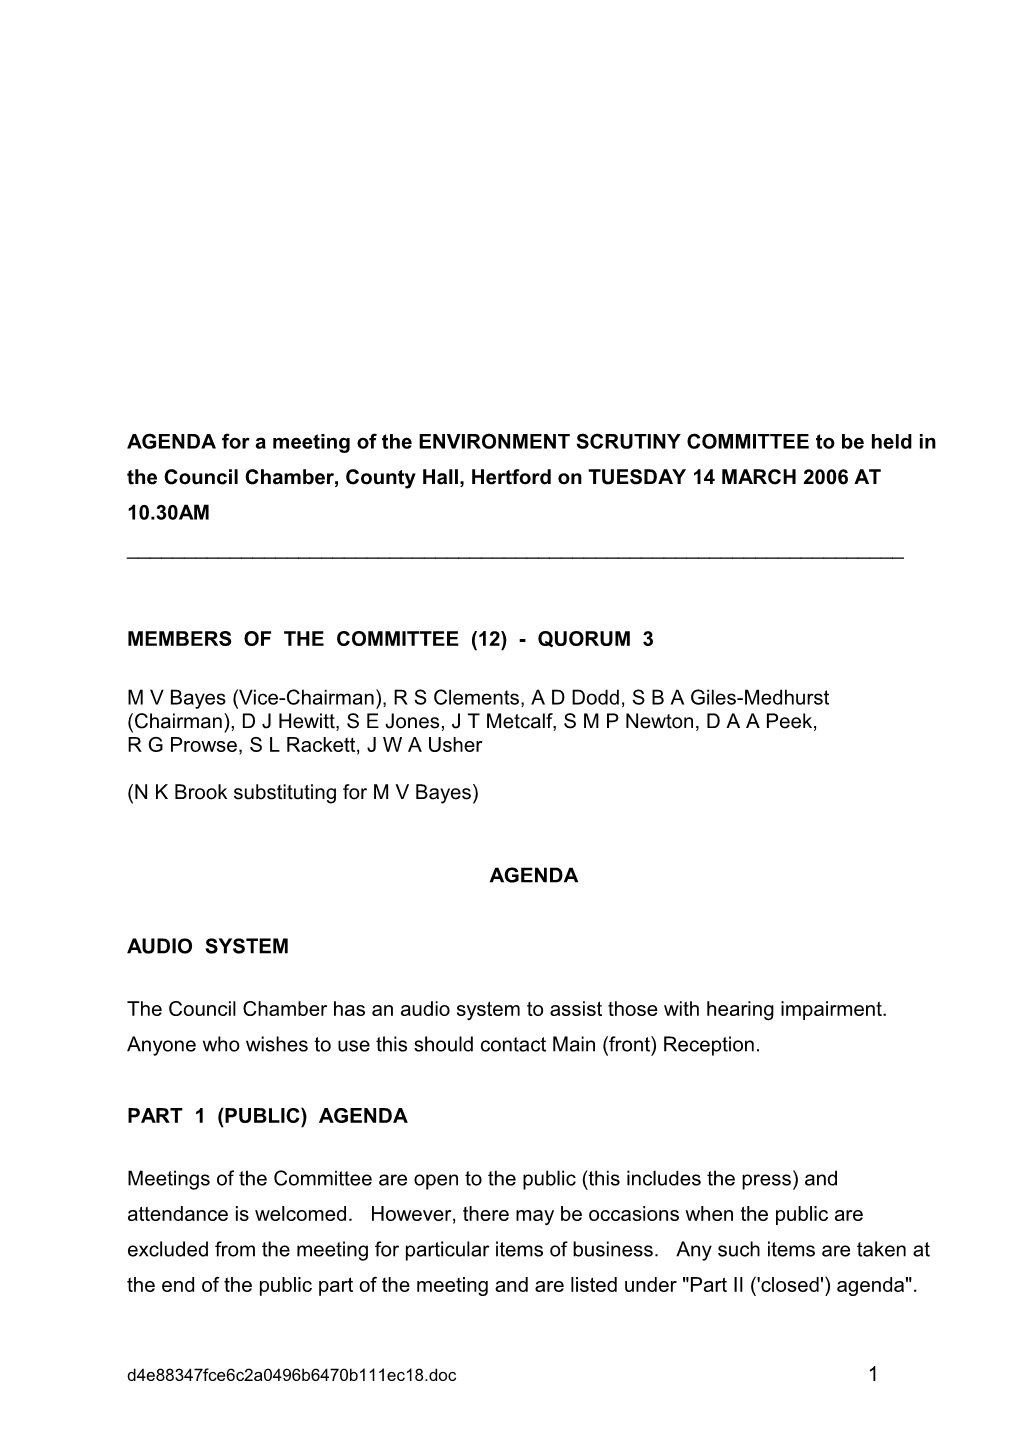 AGENDA for a Meeting of the ENVIRONMENT SCRUTINY COMMITTEE to Be Held In